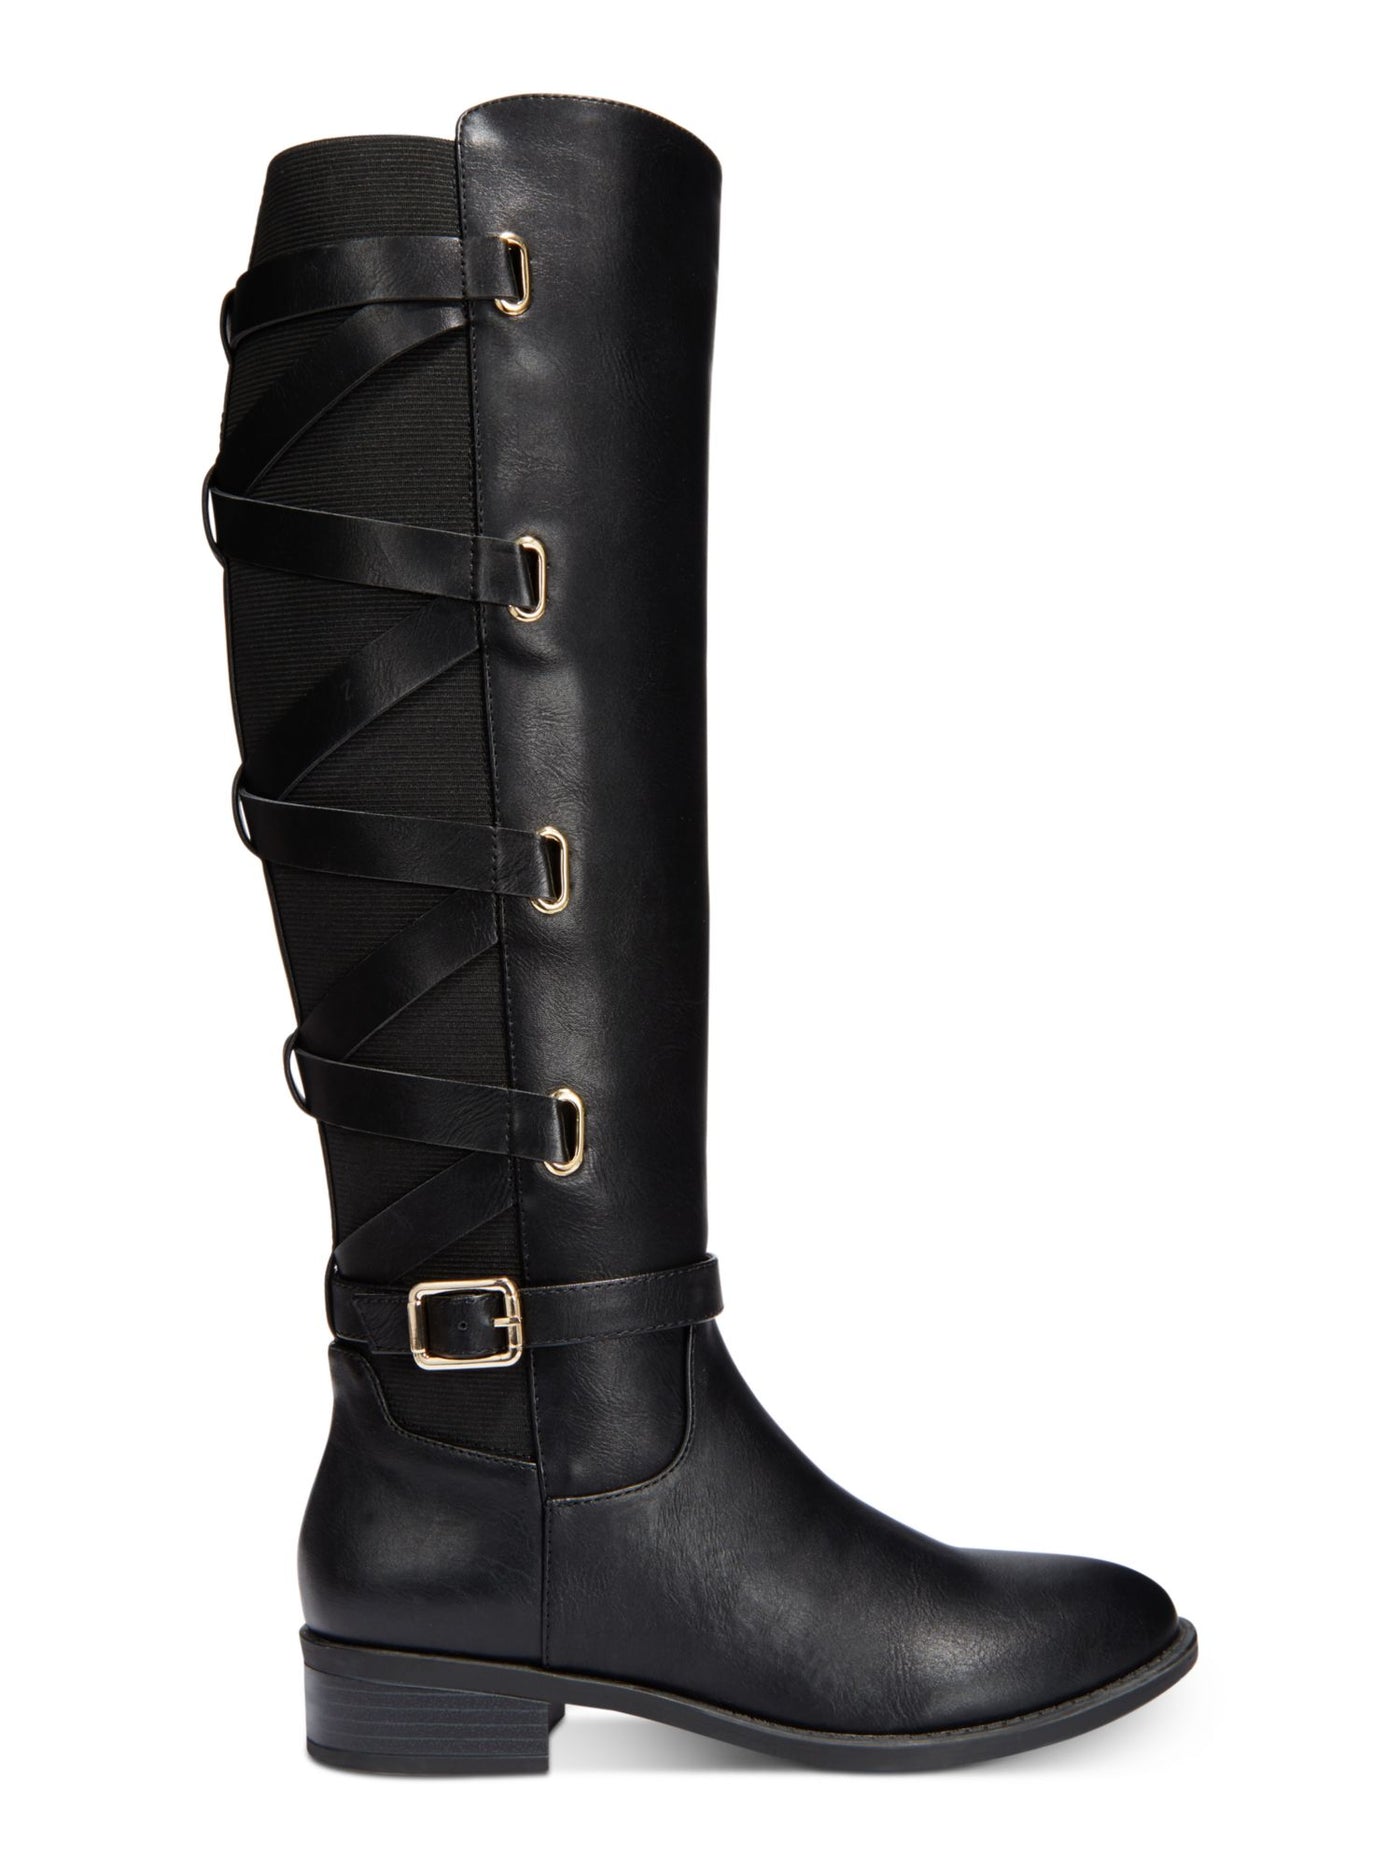 THALIA SODI Womens Black Criss-Cross Straps At Back Buckle Accent Stretch Round Toe Stacked Heel Zip-Up Boots Shoes 6